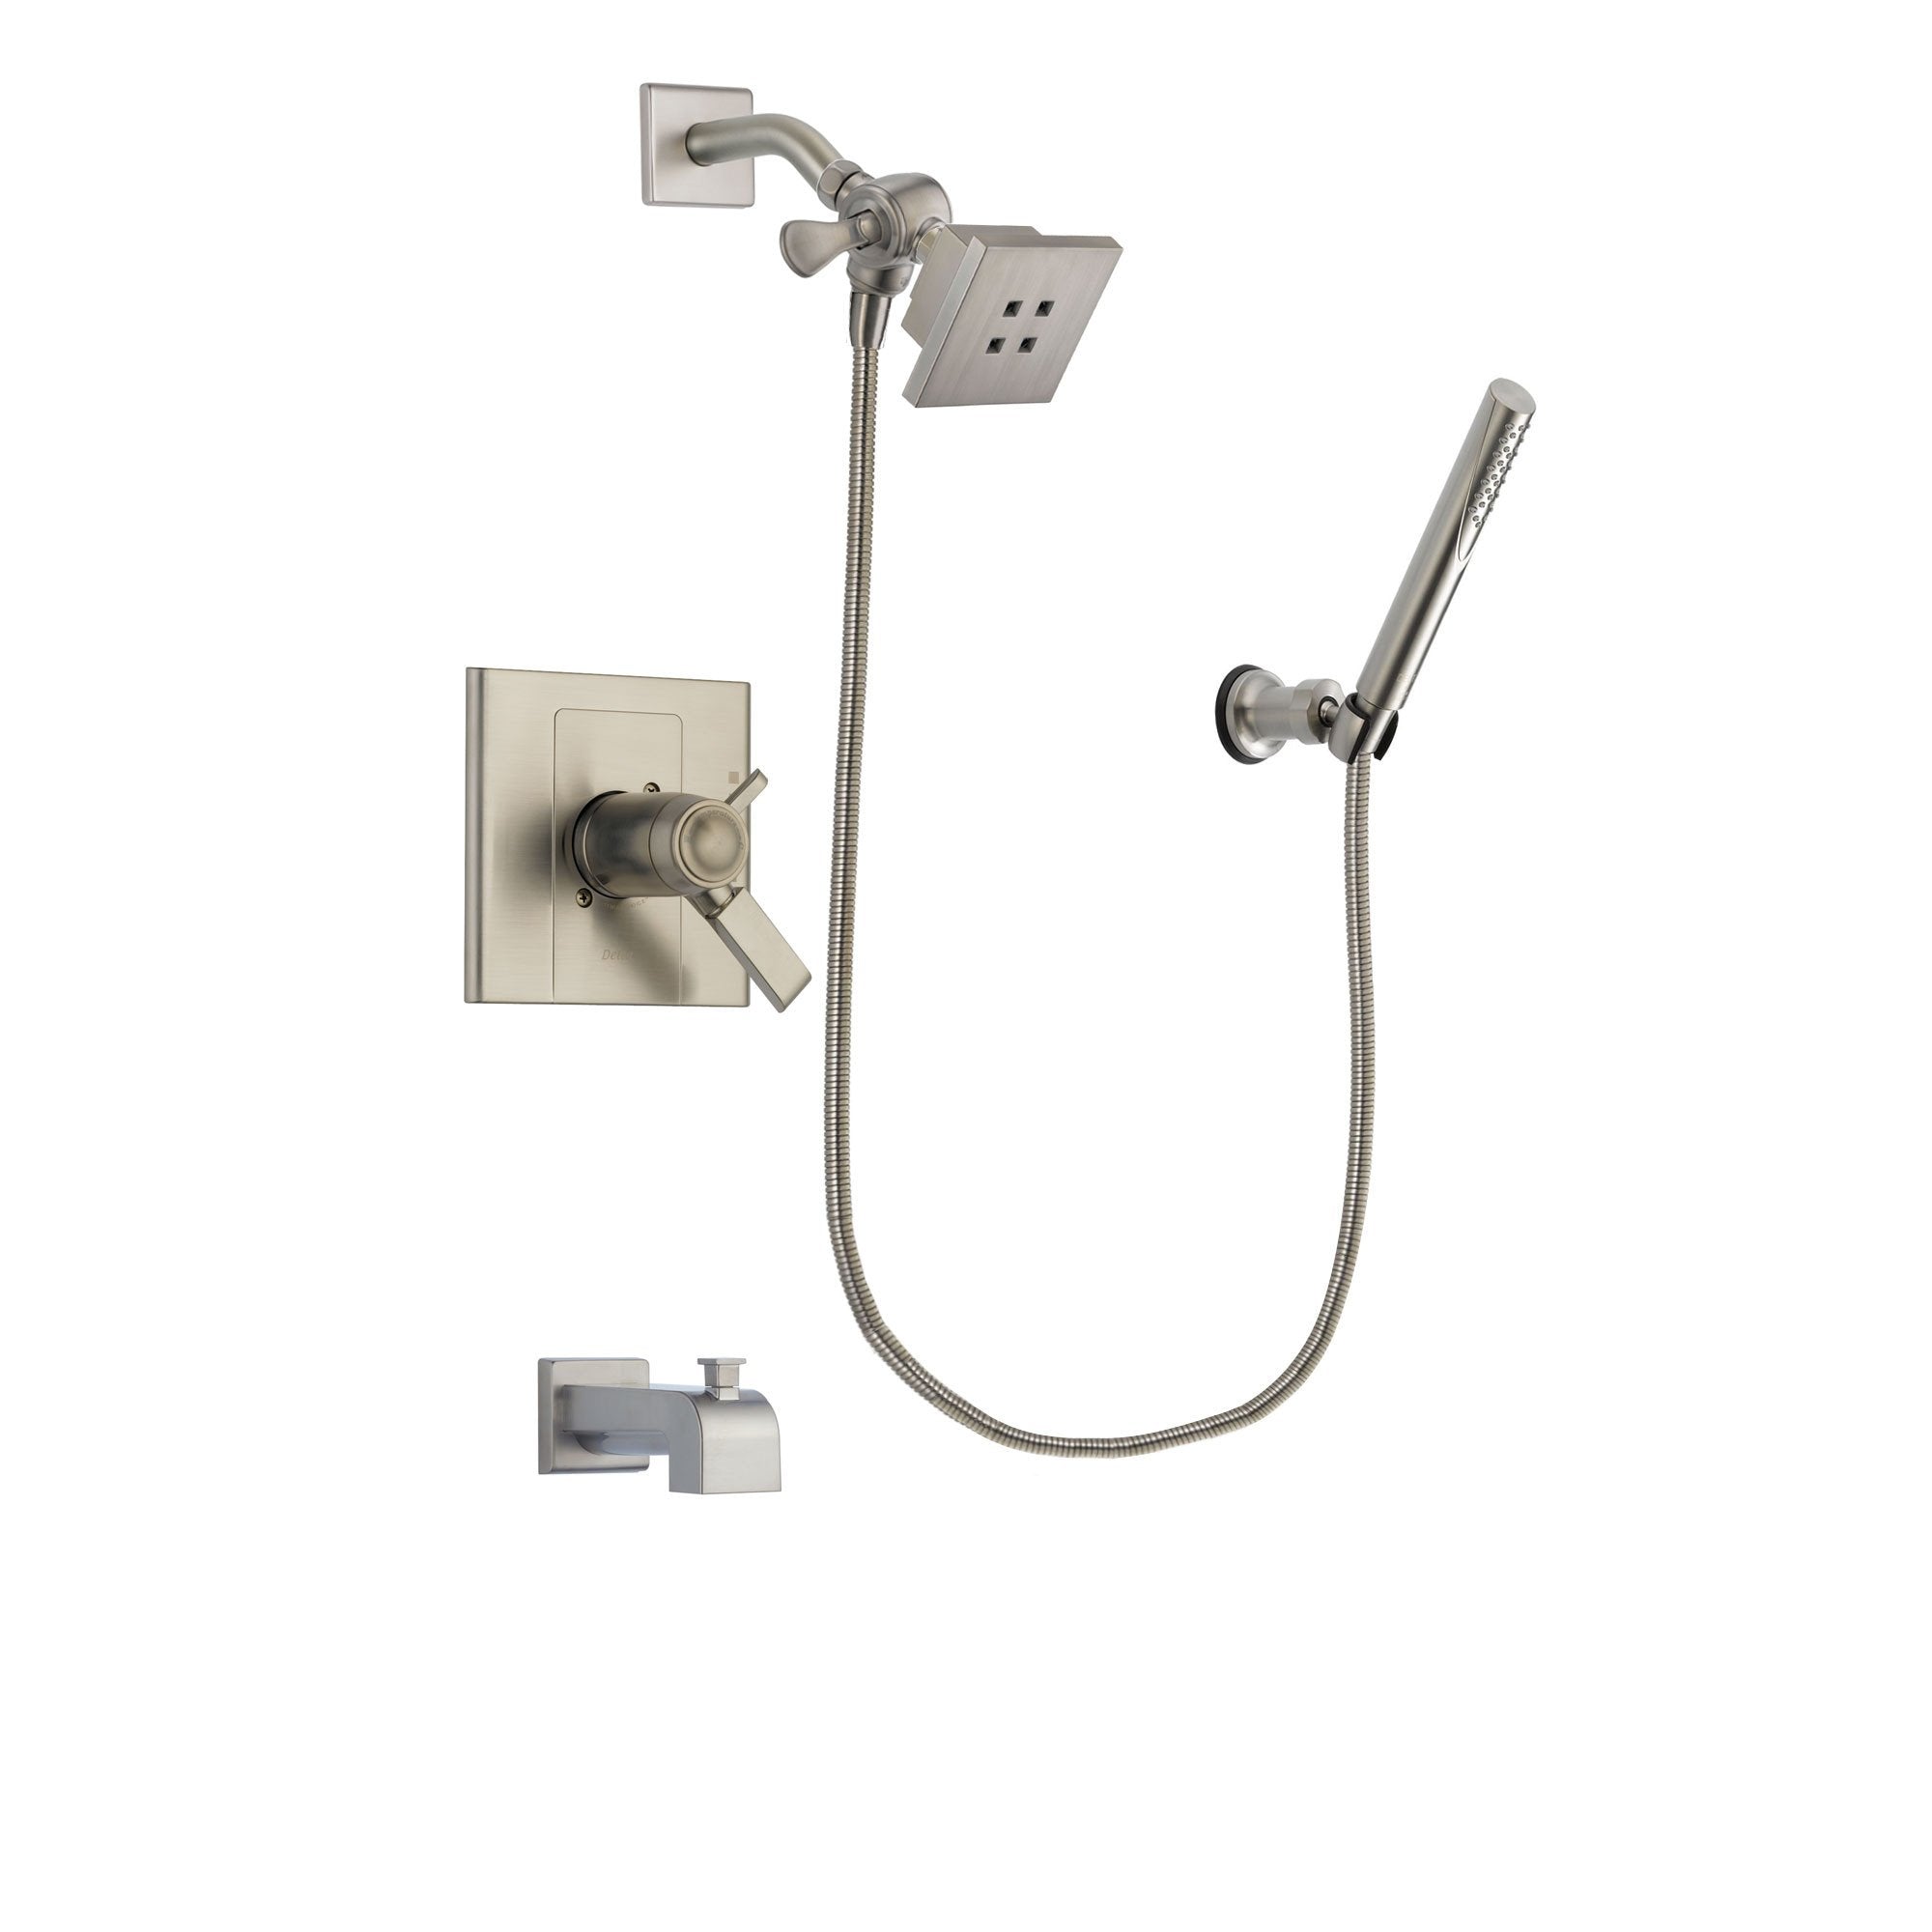 Delta Arzo Stainless Steel Finish Thermostatic Tub and Shower Faucet System Package with Square Showerhead and Modern Handheld Shower Spray Includes Rough-in Valve and Tub Spout DSP2115V